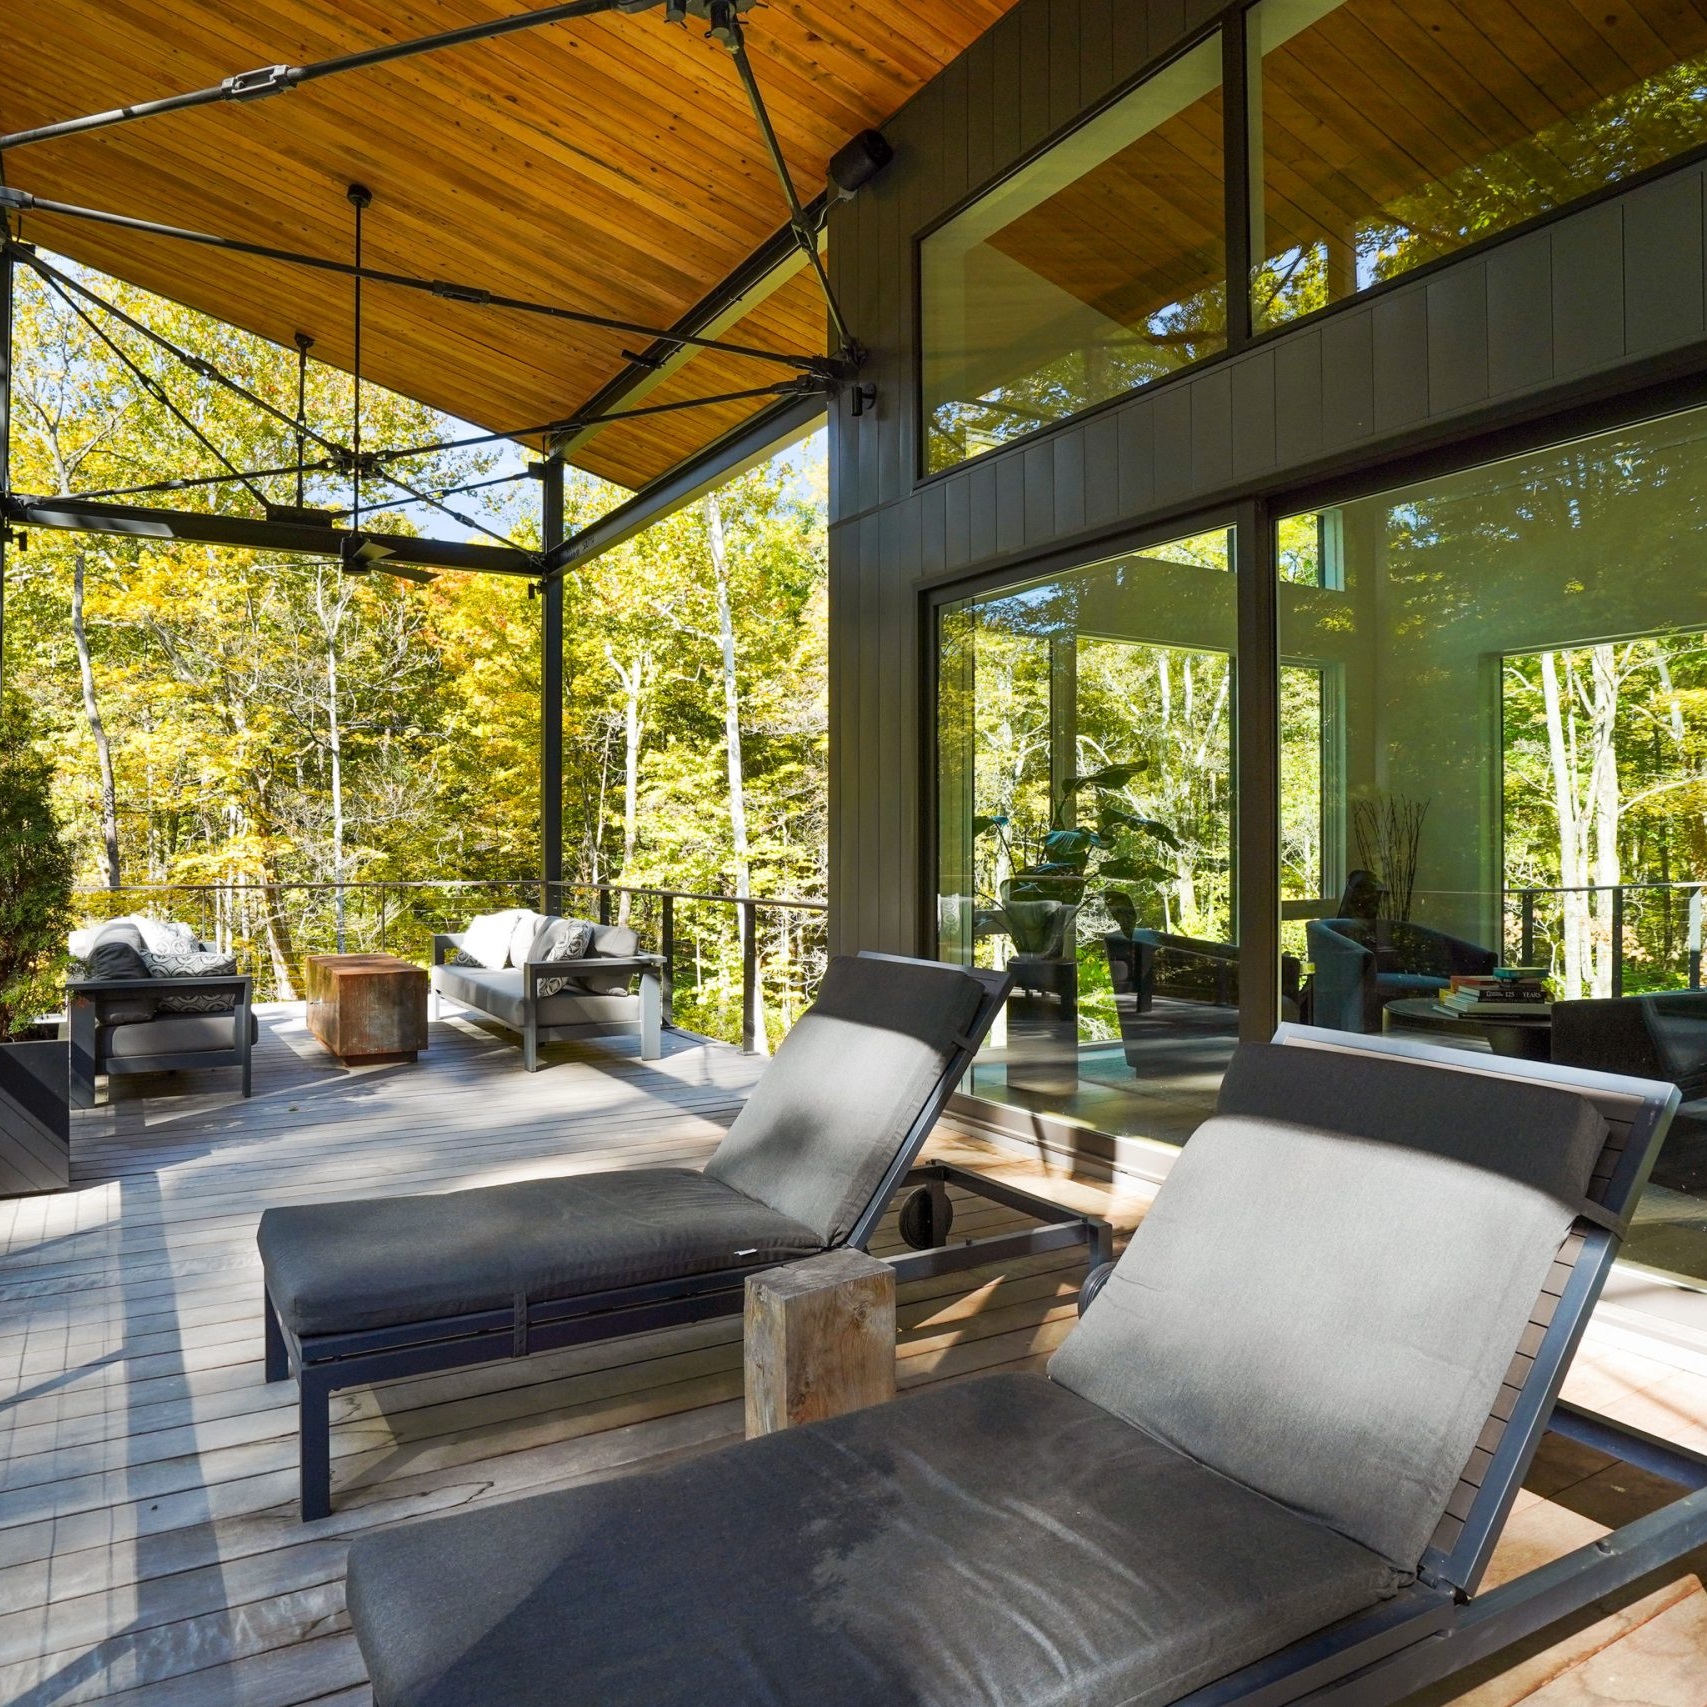 Lounge area with comfy chairs overlooking trees on the side